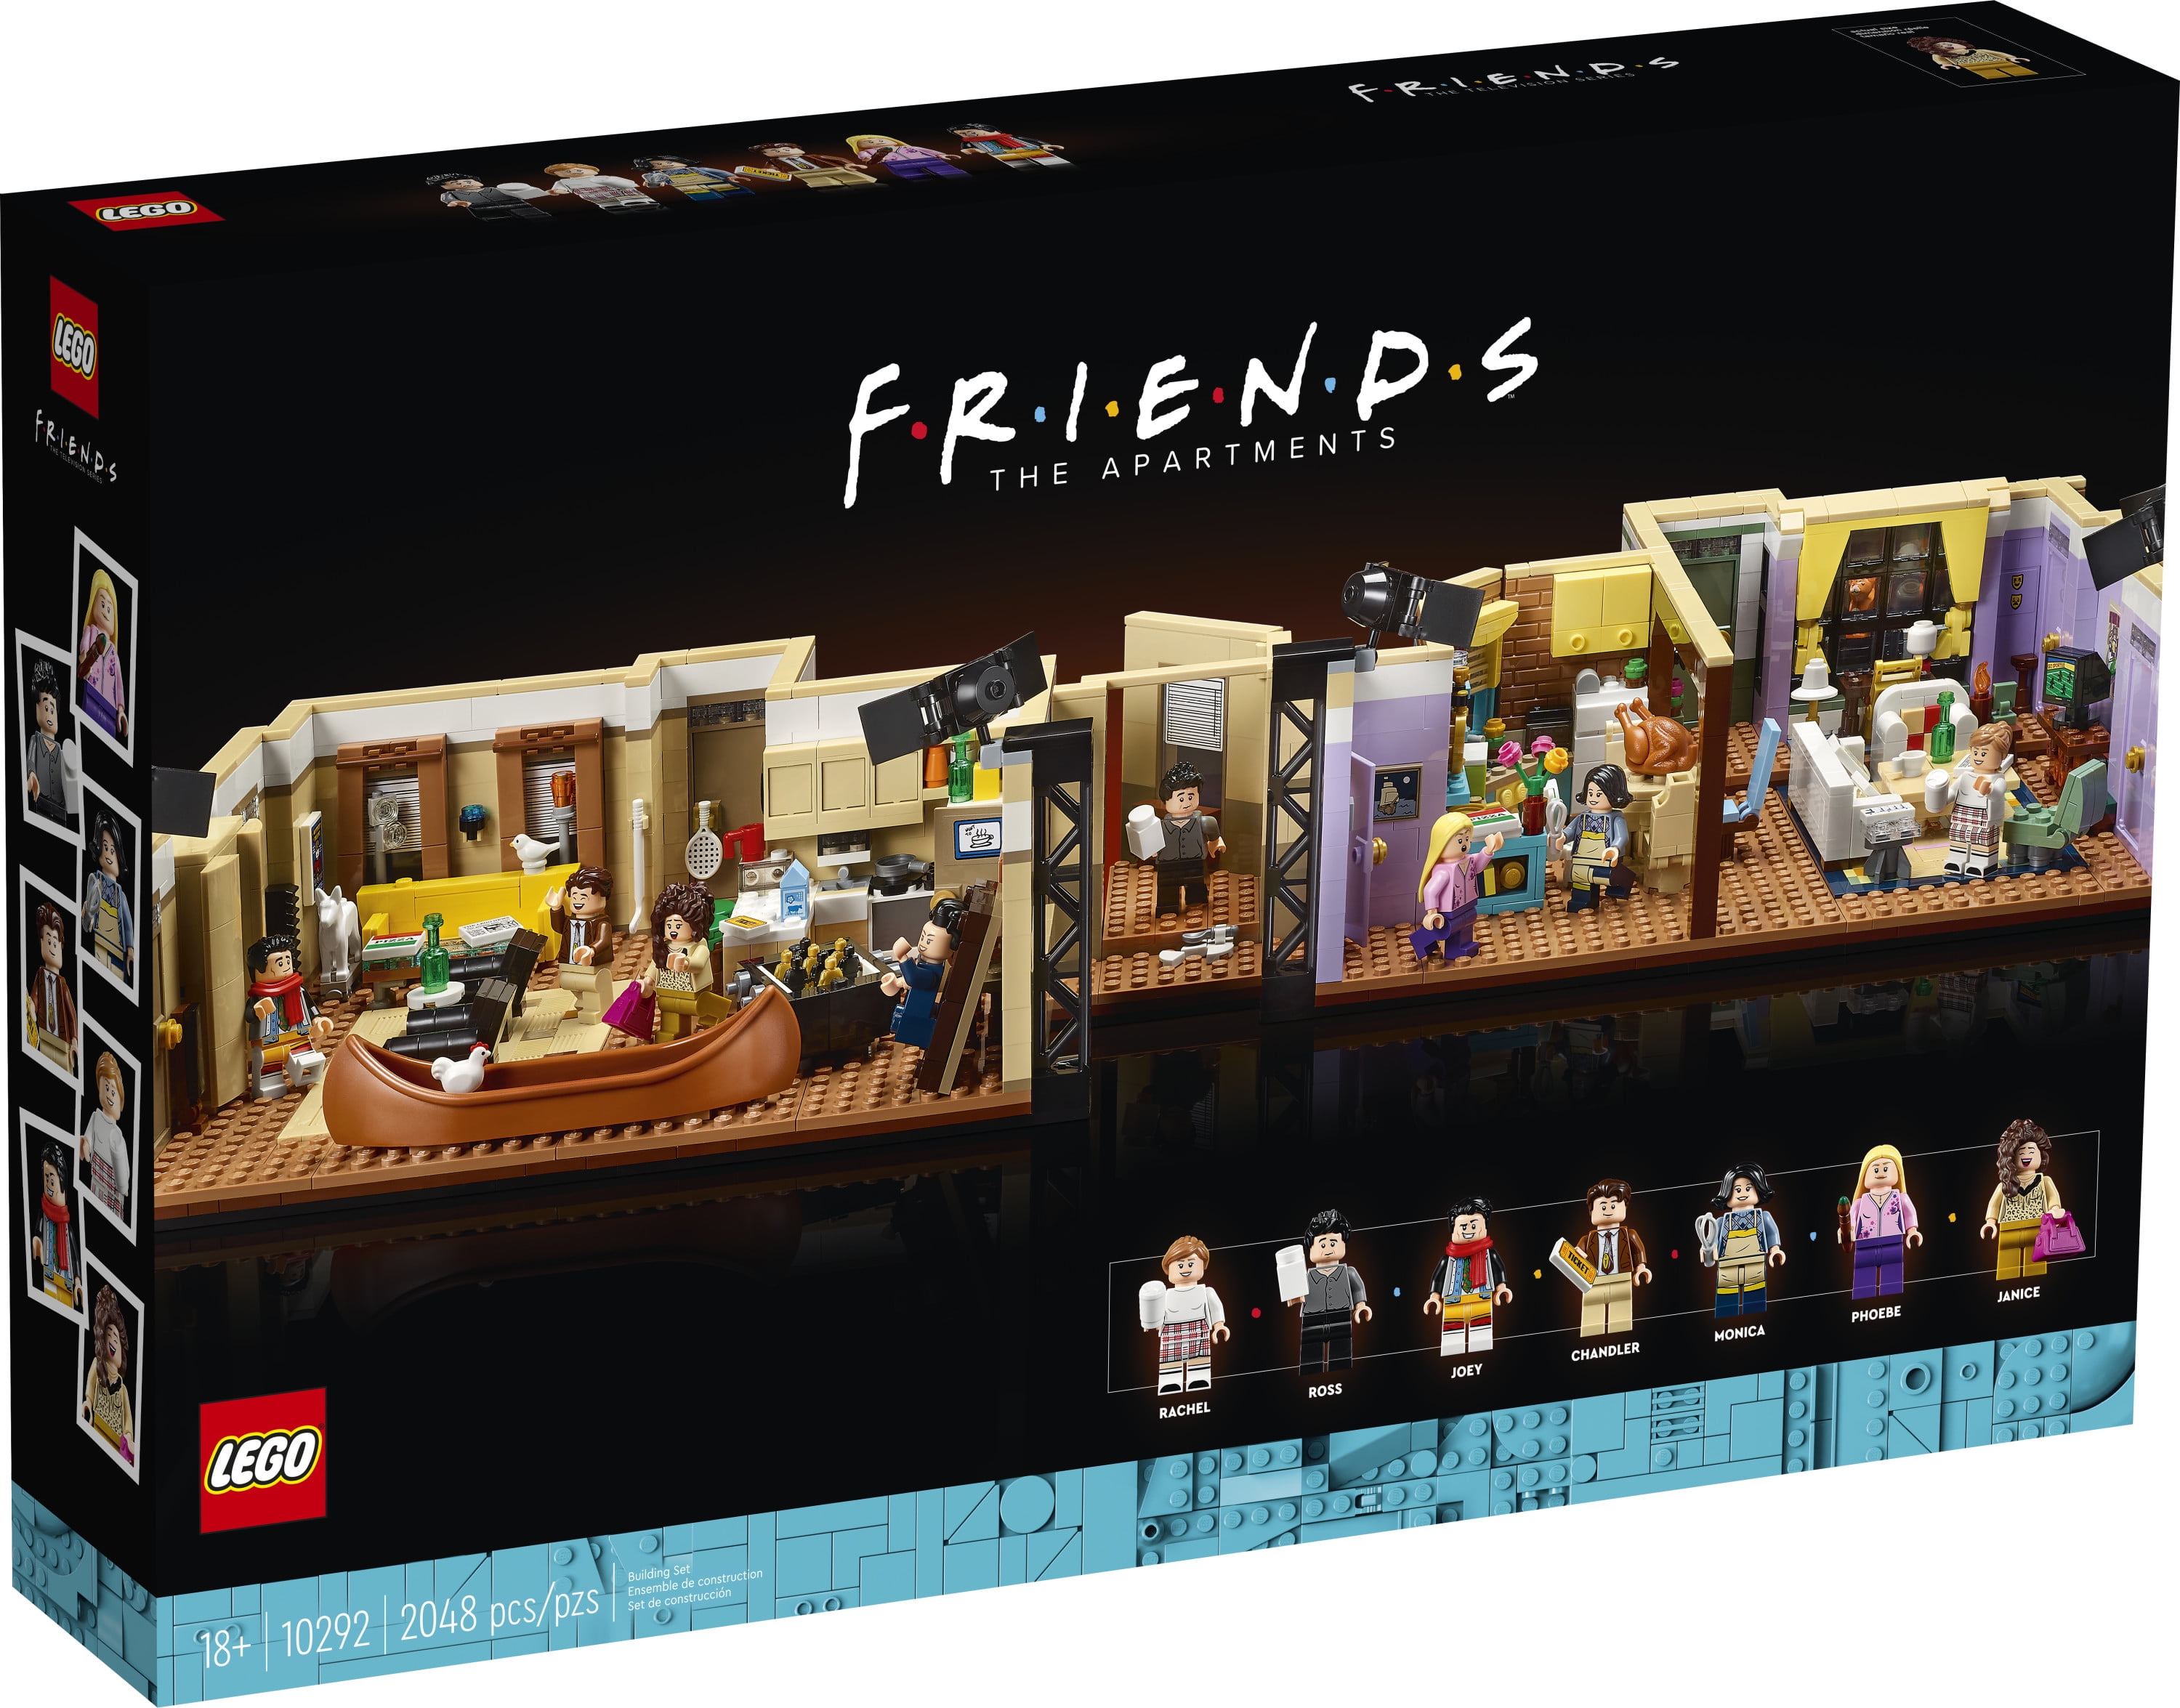 LEGO Icons Friends Apartments 10292, Friends TV Show Gift from Iconic Series, Detailed Model of Set, Collectors Building Set with 7 Minifigures of Your Favorite Characters Walmart.com